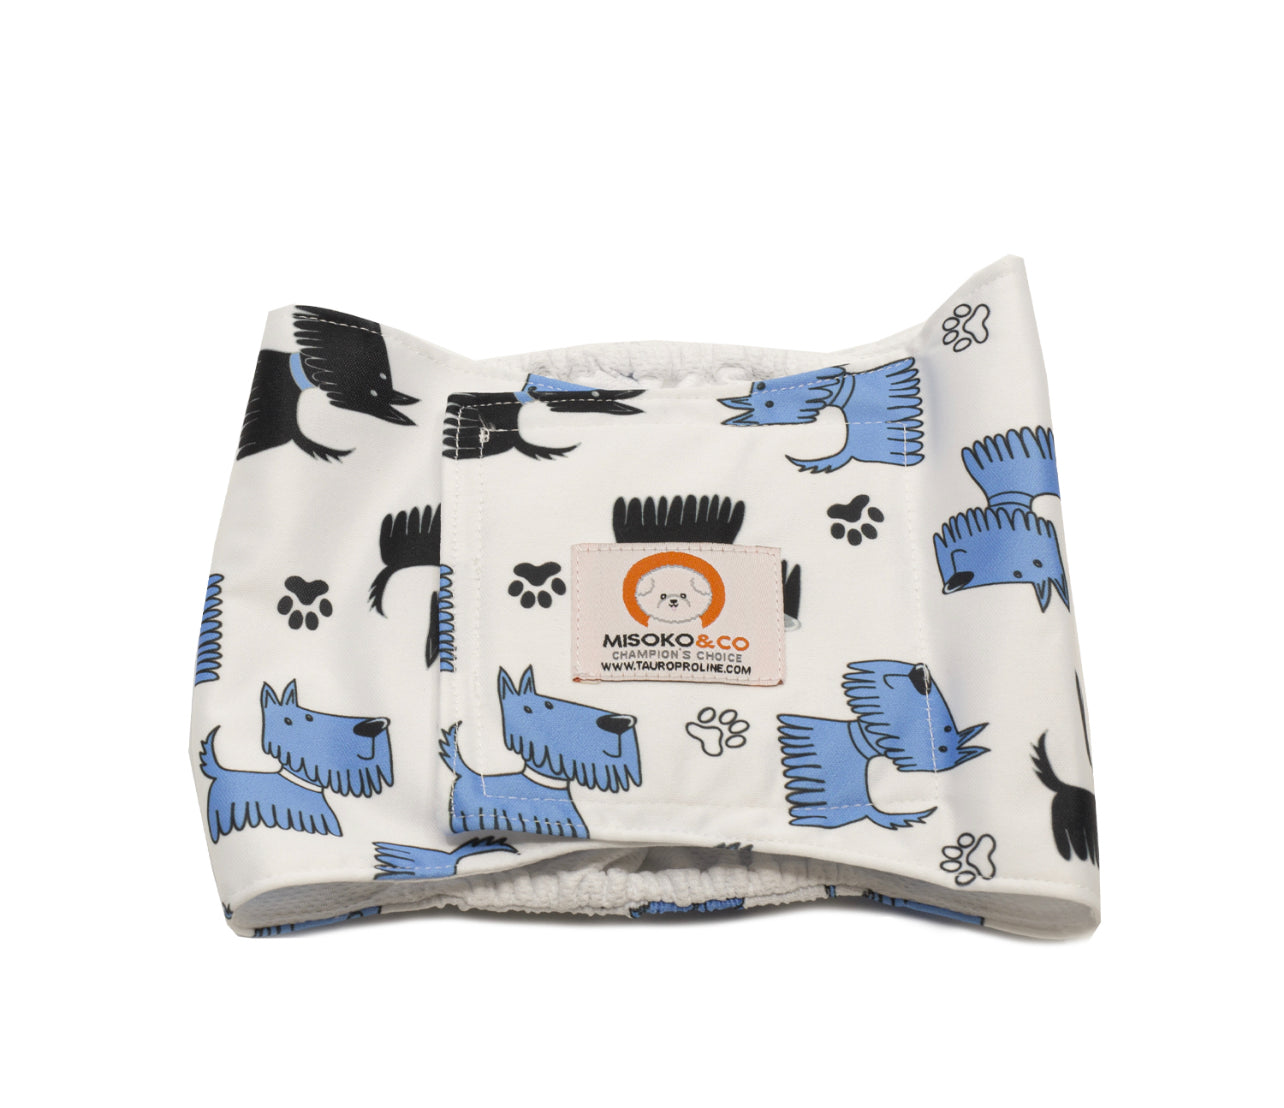 Misoko&Co Reusable Diapers for Males